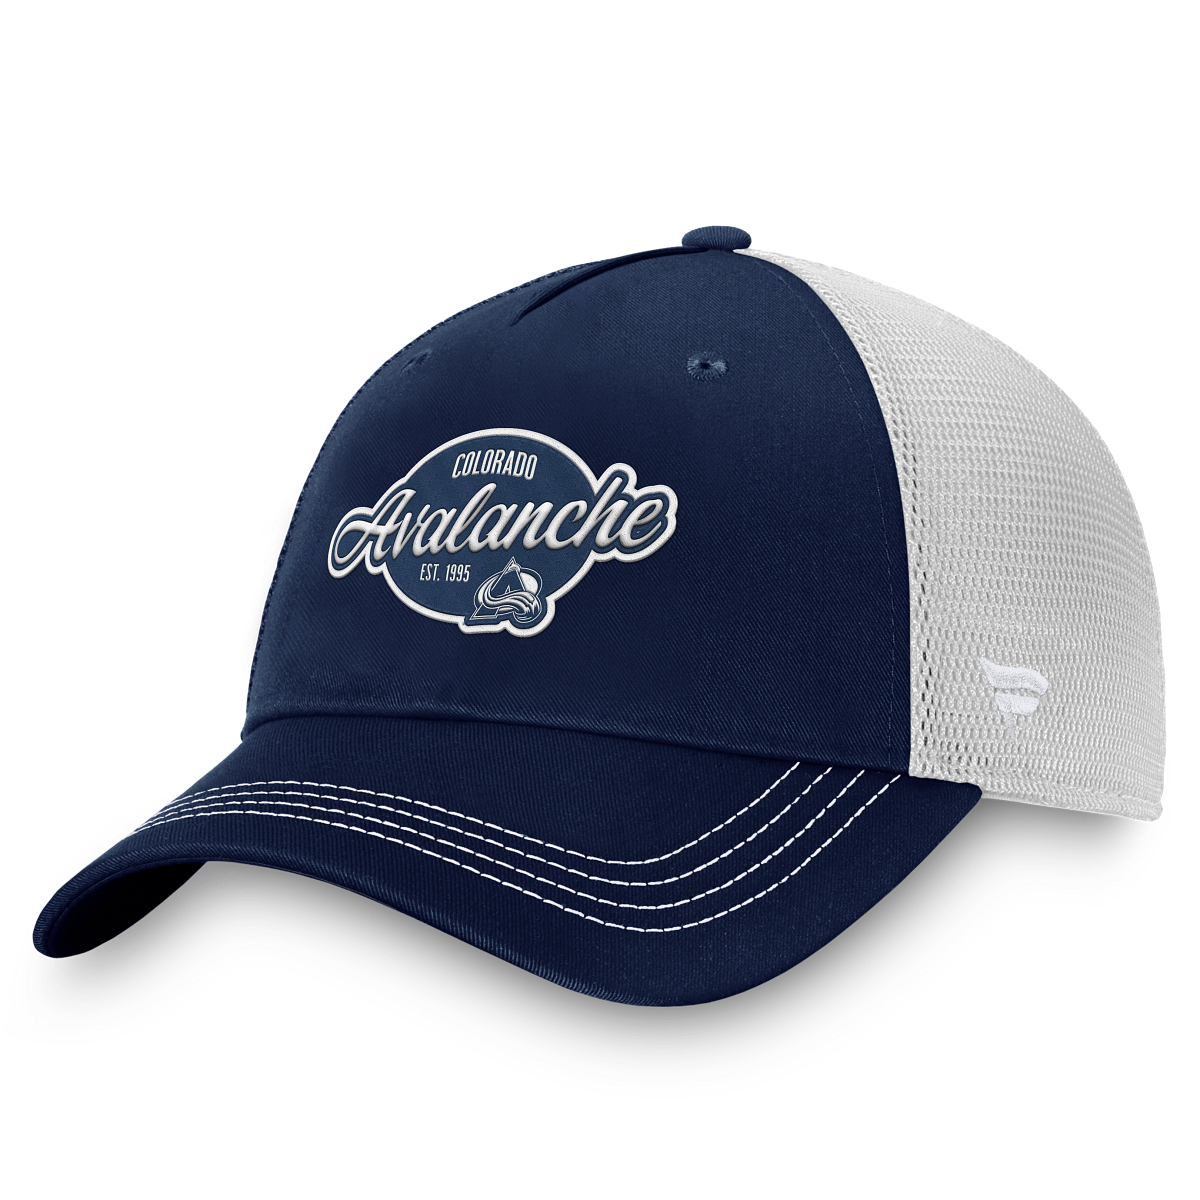 Chevy Avalanche Hats & Caps